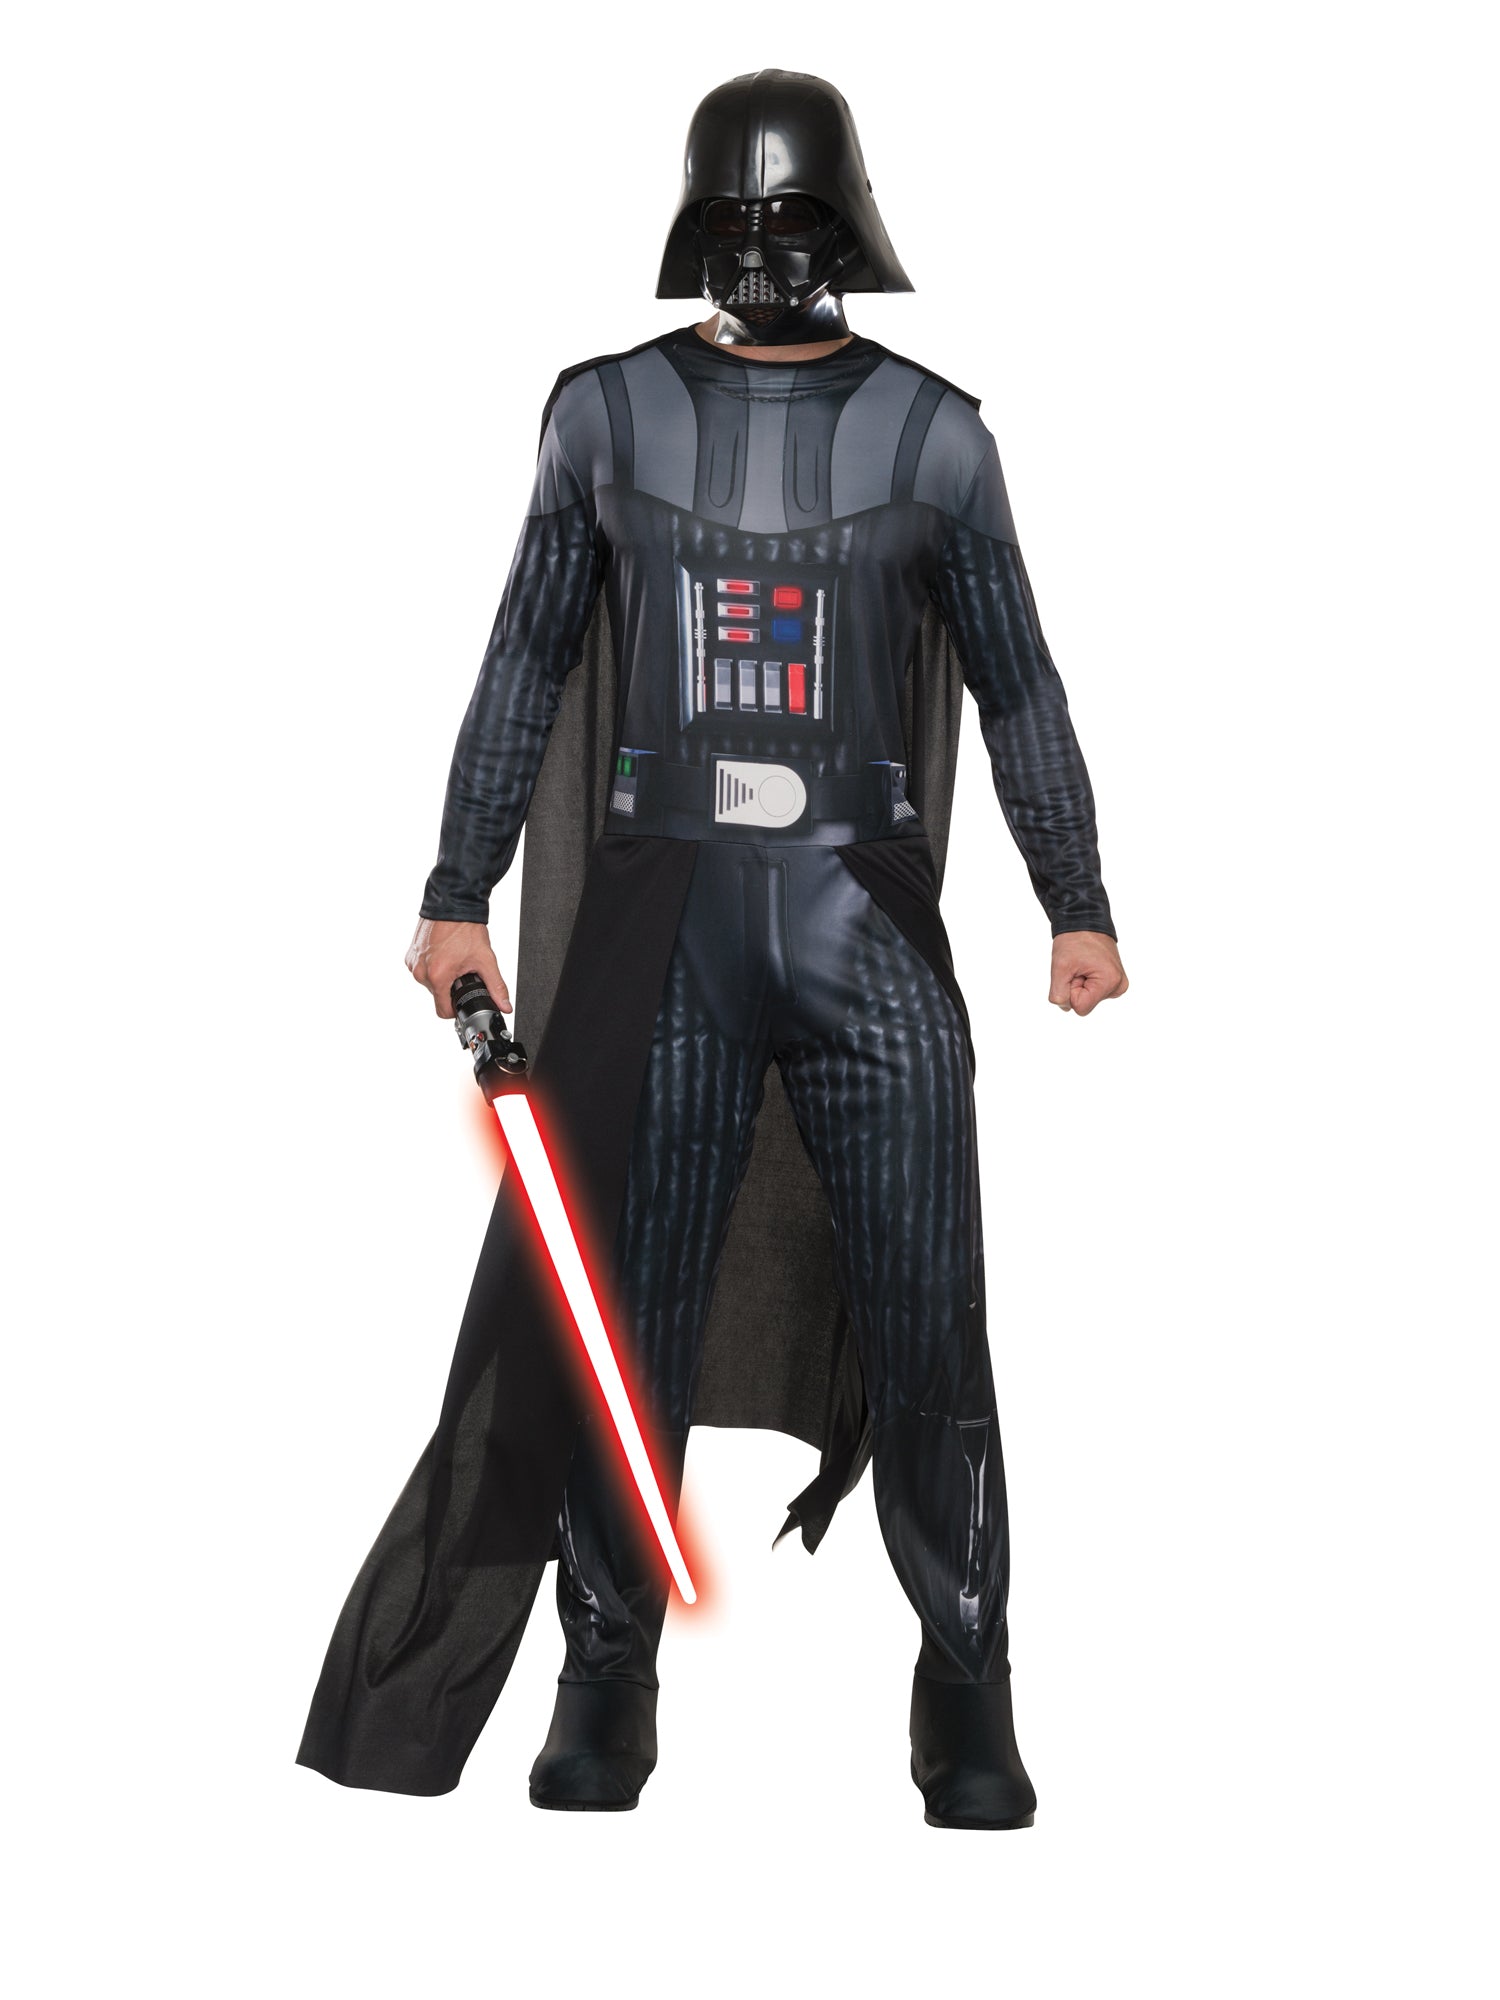 Darth Vader, A New Hope, Episode IV, A New Hope, Multi, Star Wars, Adult Costume, Extra Large, Front